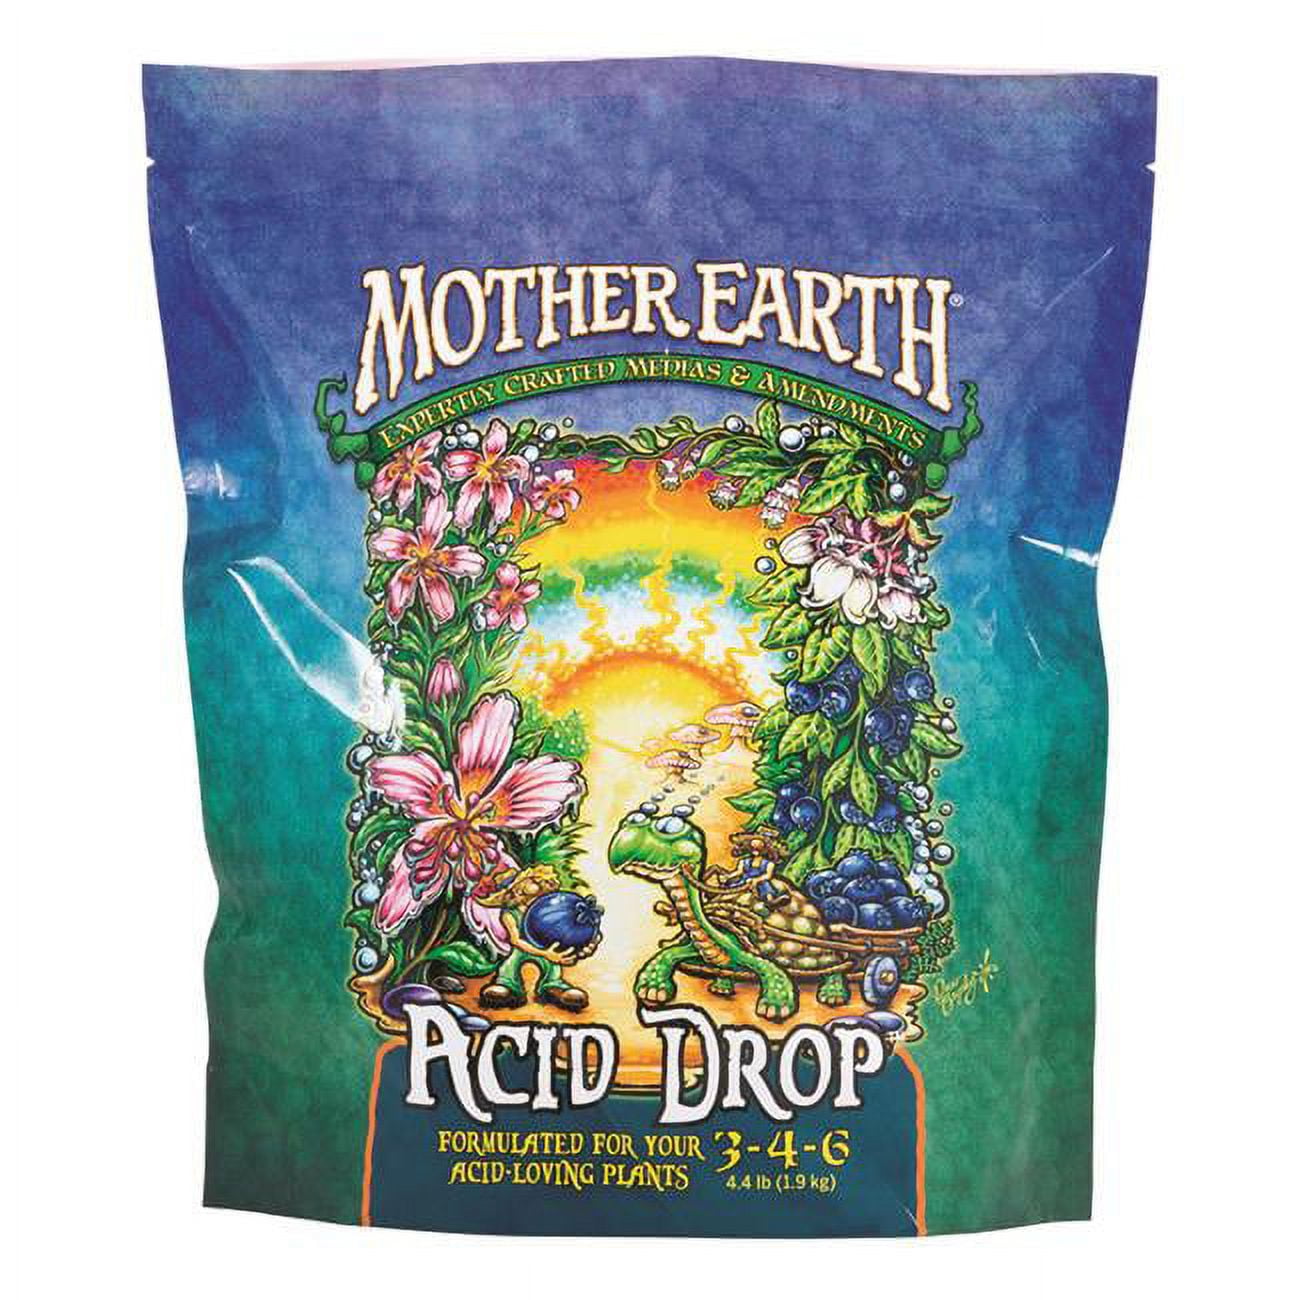 Picture of Mother Earth 7004430 Acid DropAcid Drop Formulated for Your Acid-Loving Plants 3-4-6 Hydroponic Plant Nutrients